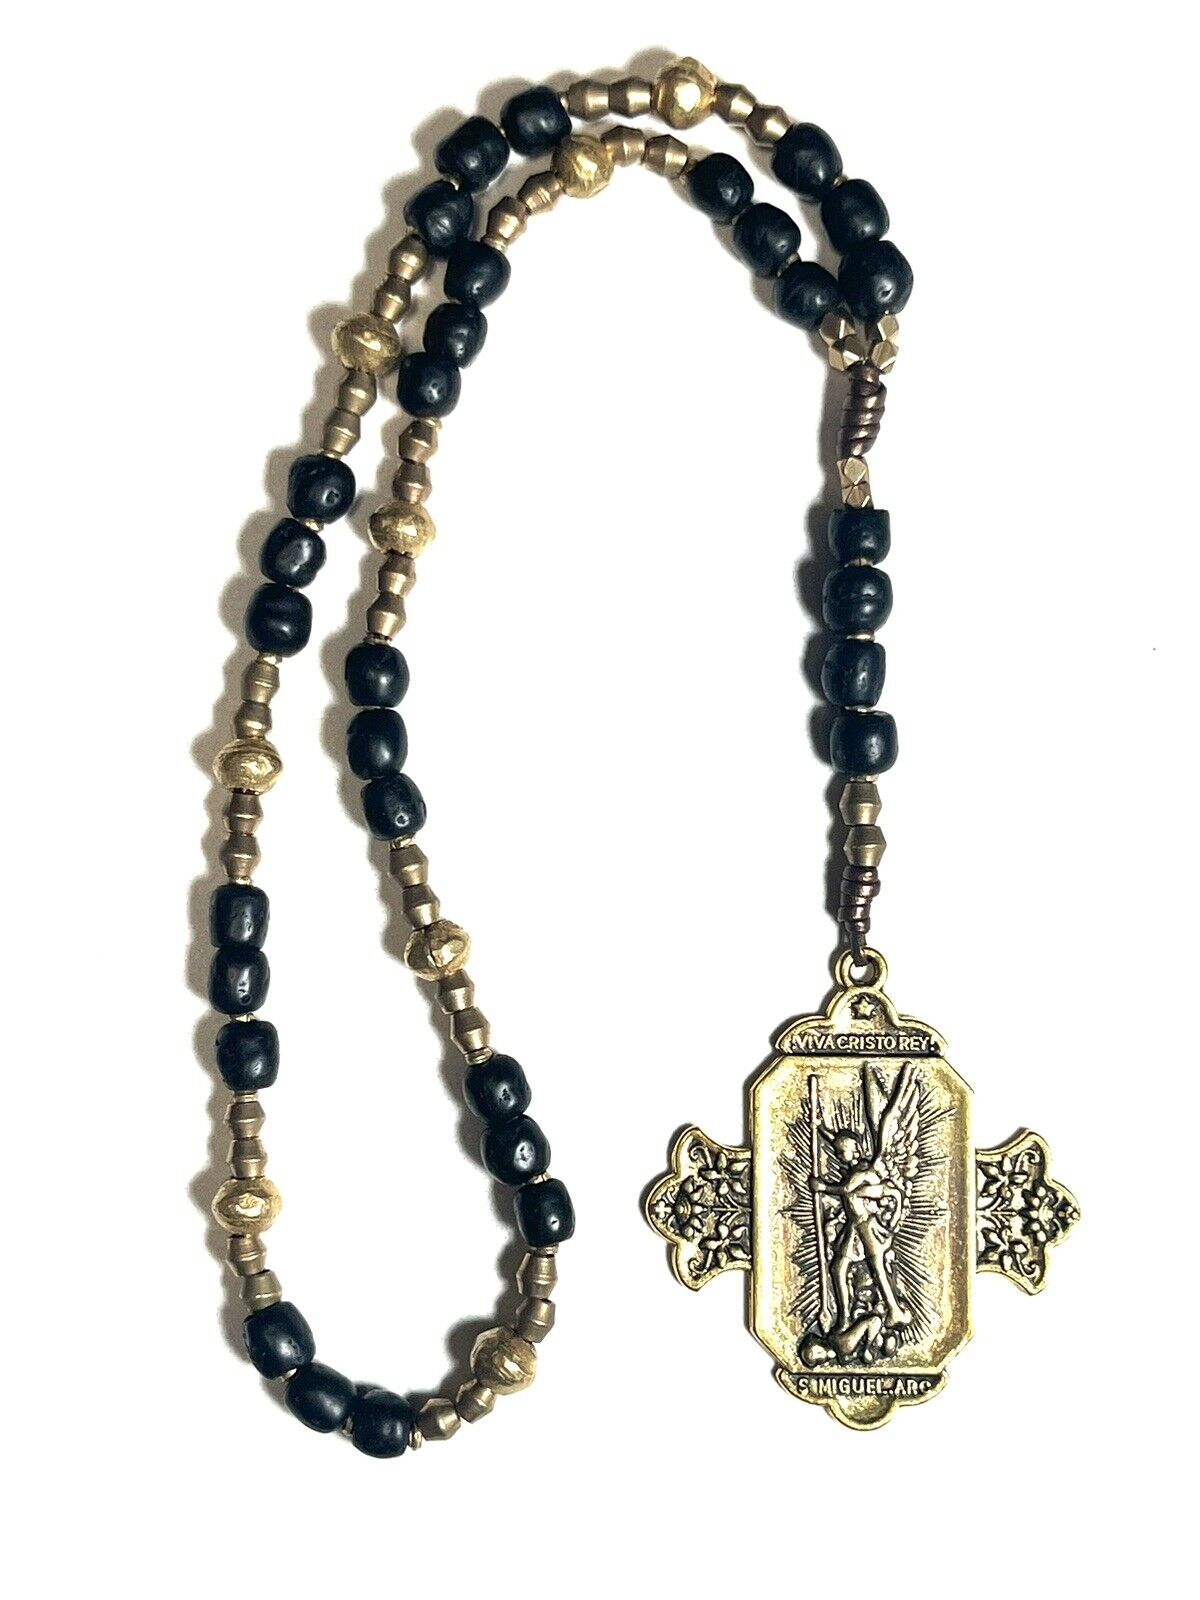 Exquisite St. Michael The Archangel Chaplet Black Hand Knotted Rosary San Miguel